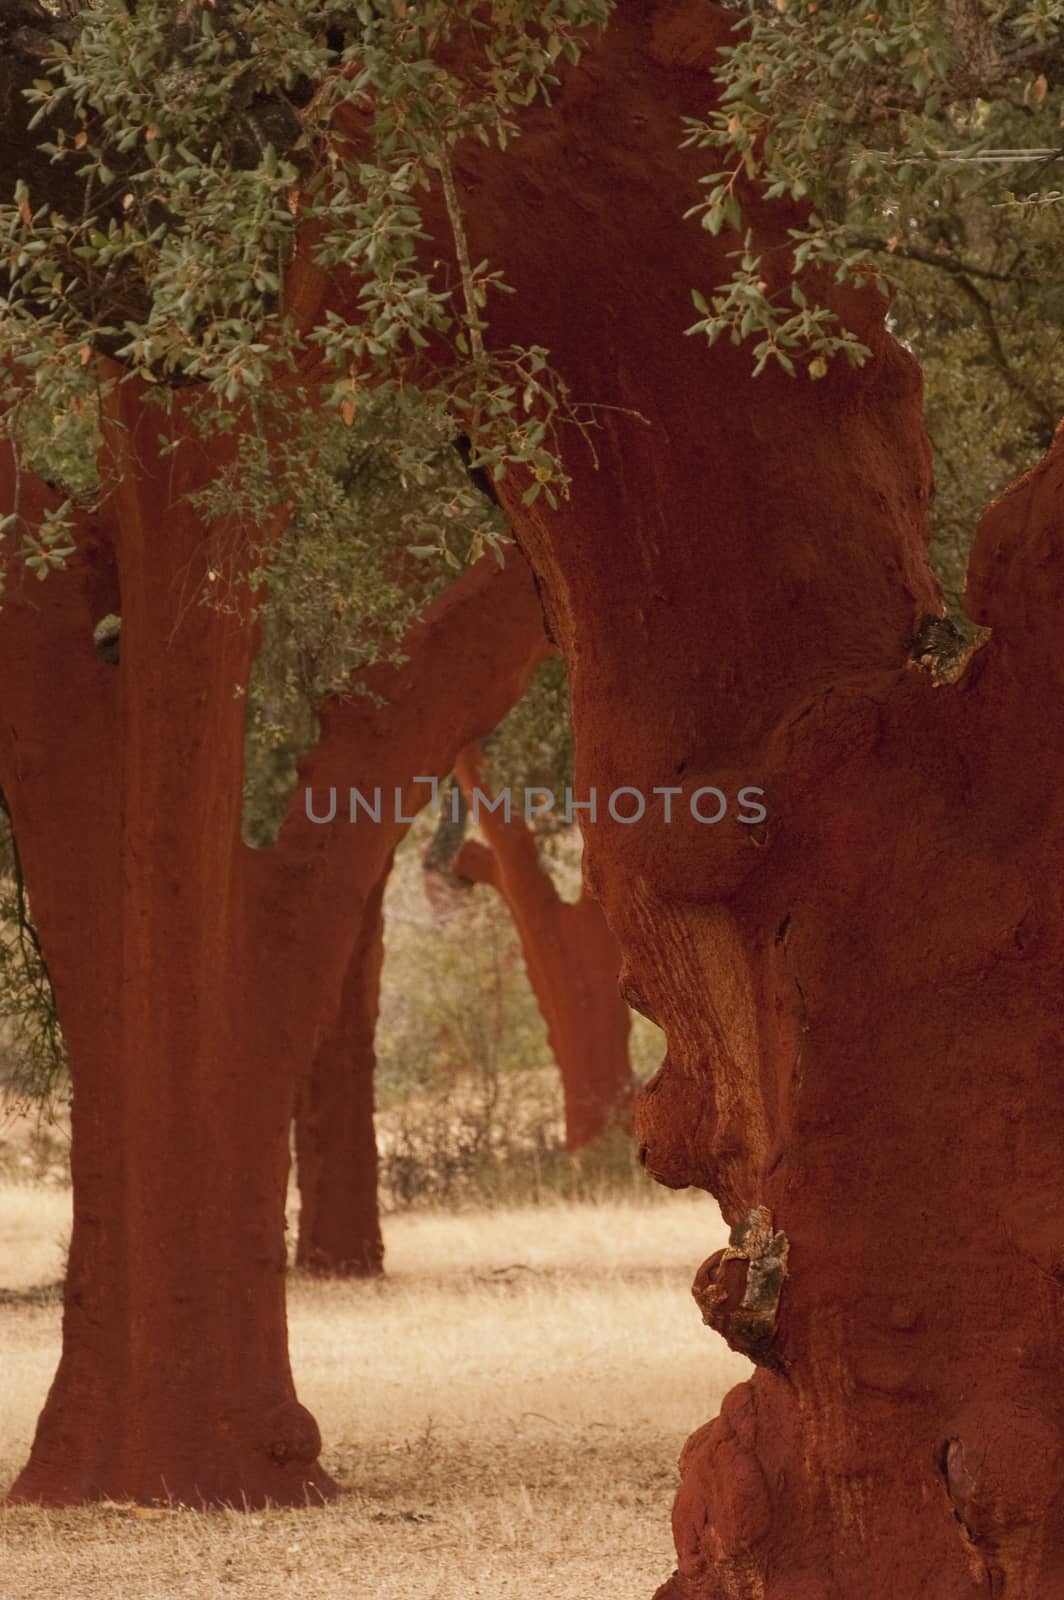 Cork oak after the extraction of the cork, (Quercus suber), Spai by jalonsohu@gmail.com